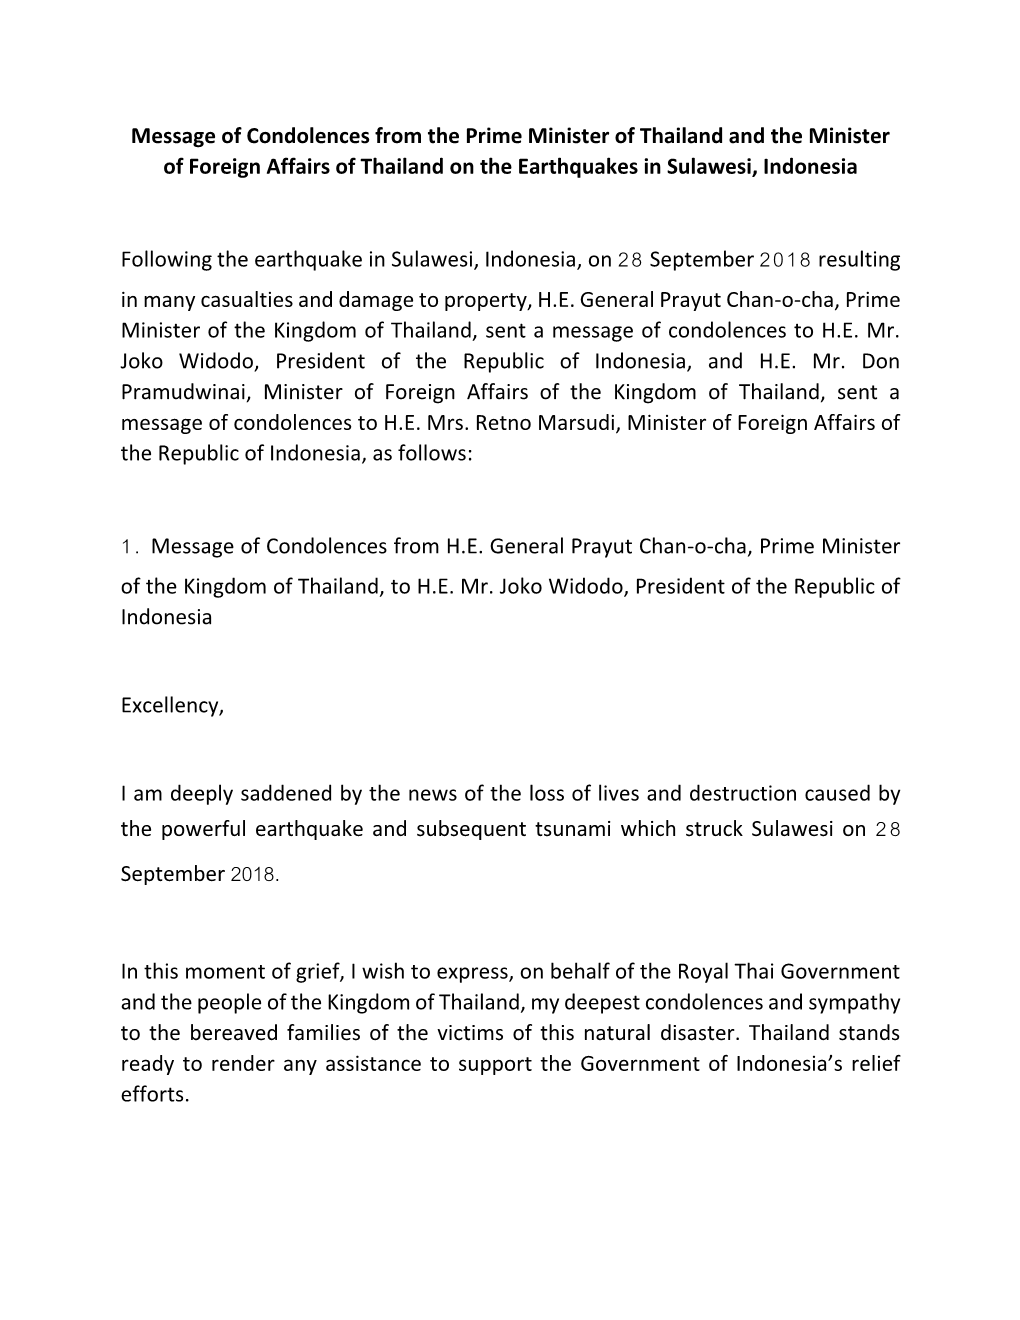 Message of Condolences from the Prime Minister of Thailand and the Minister of Foreign Affairs of Thailand on the Earthquakes in Sulawesi, Indonesia